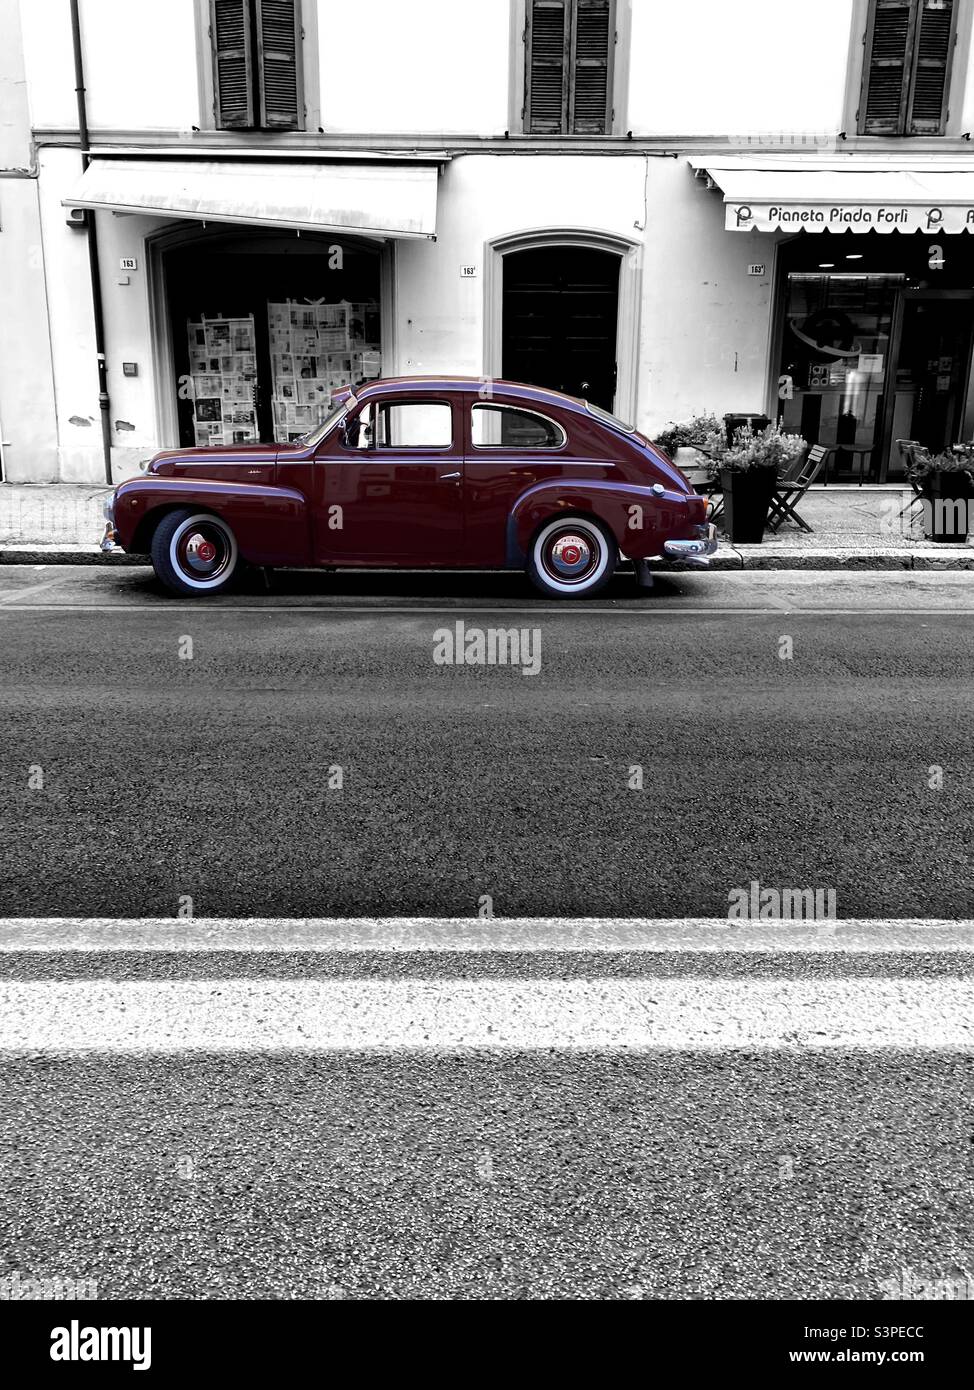 Vintage Volvo on the streets of Forlì, Italy. Stock Photo